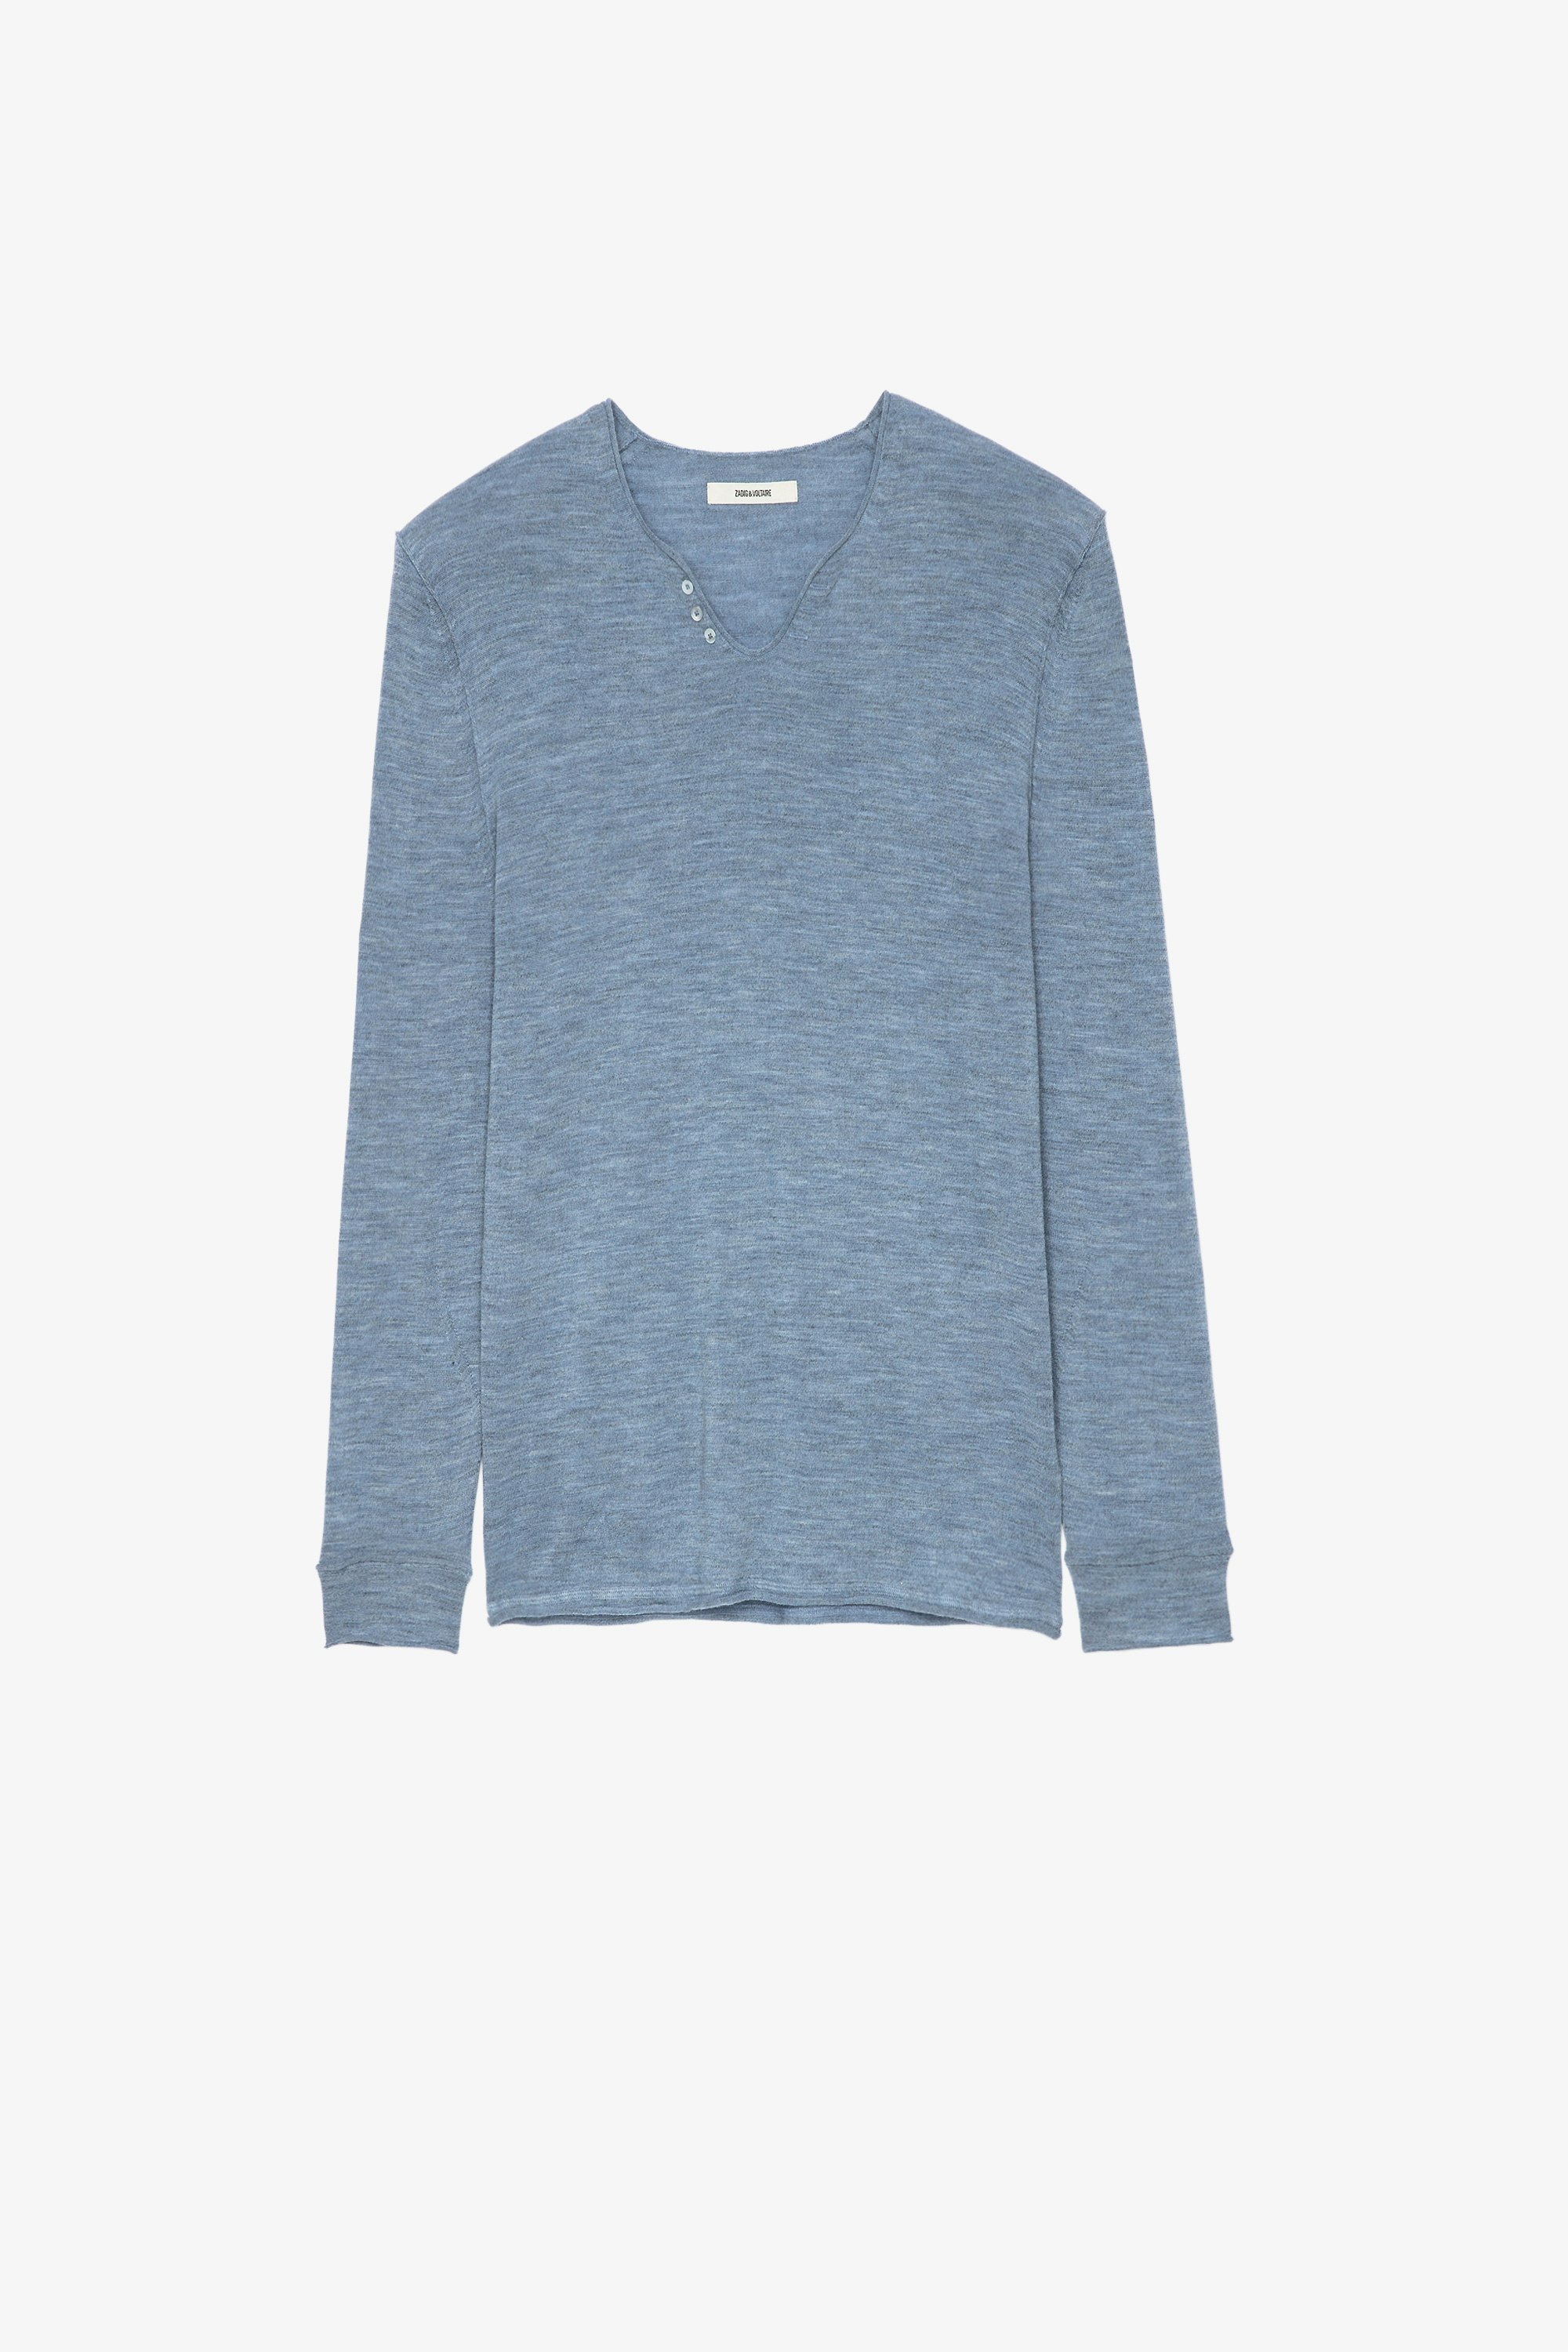 Monastir Pullover Men's blue merino wool Henley pullover, long-sleeved with arrows on the back